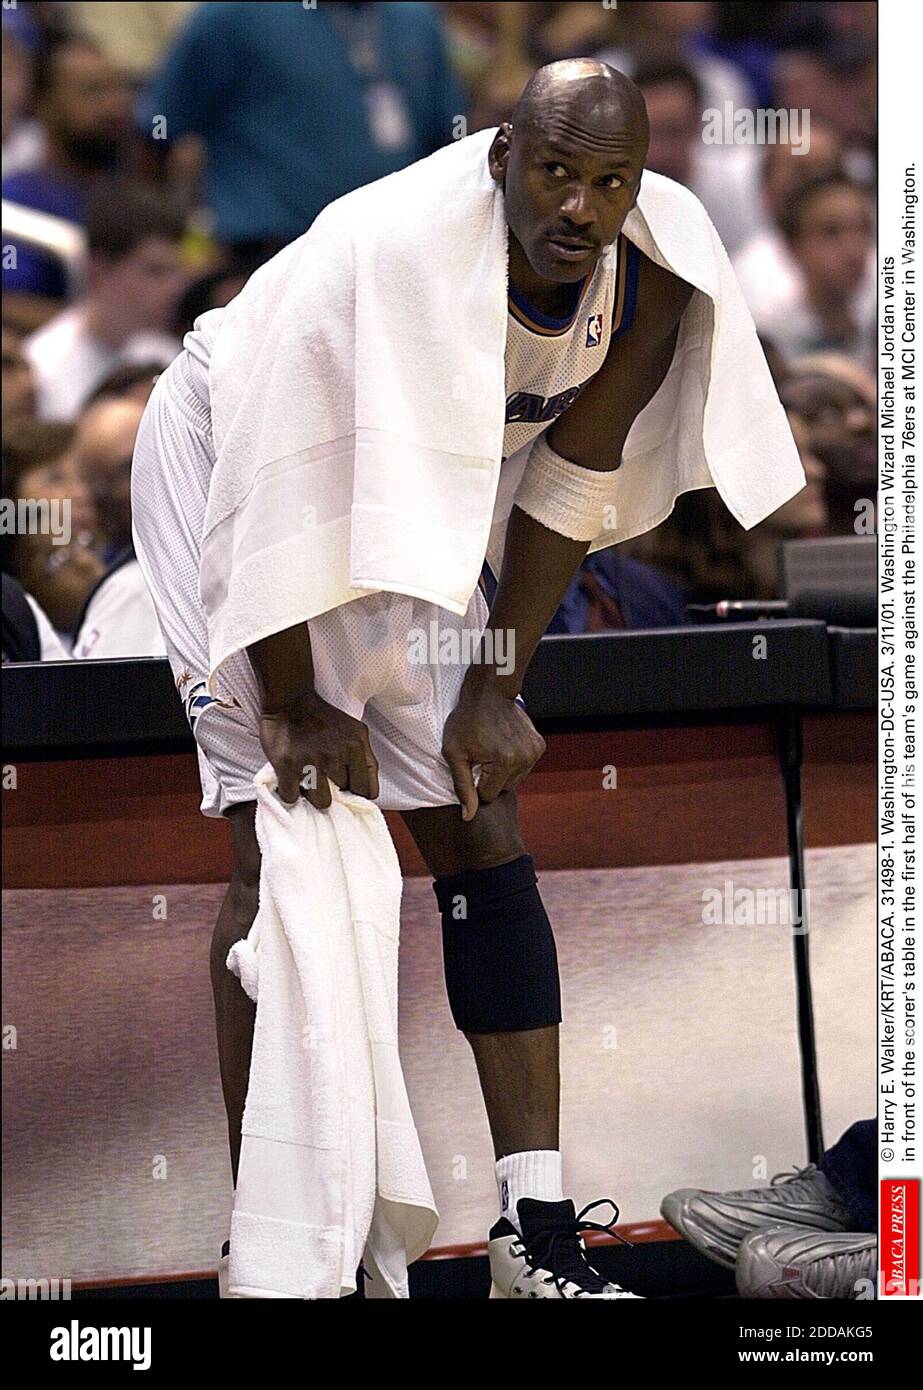 NO FILM, NO VIDEO, NO TV, NO DOCUMENTARY - © Harry E. Walker/KRT/ABACA. 31498-1. Washington-DC-USA. 3/11/01. Washington Wizard Michael Jordan waits in front of the scorer's table in the first half of his team's game against the Philadelphia 76ers at MCI Center in Washington. Stock Photo